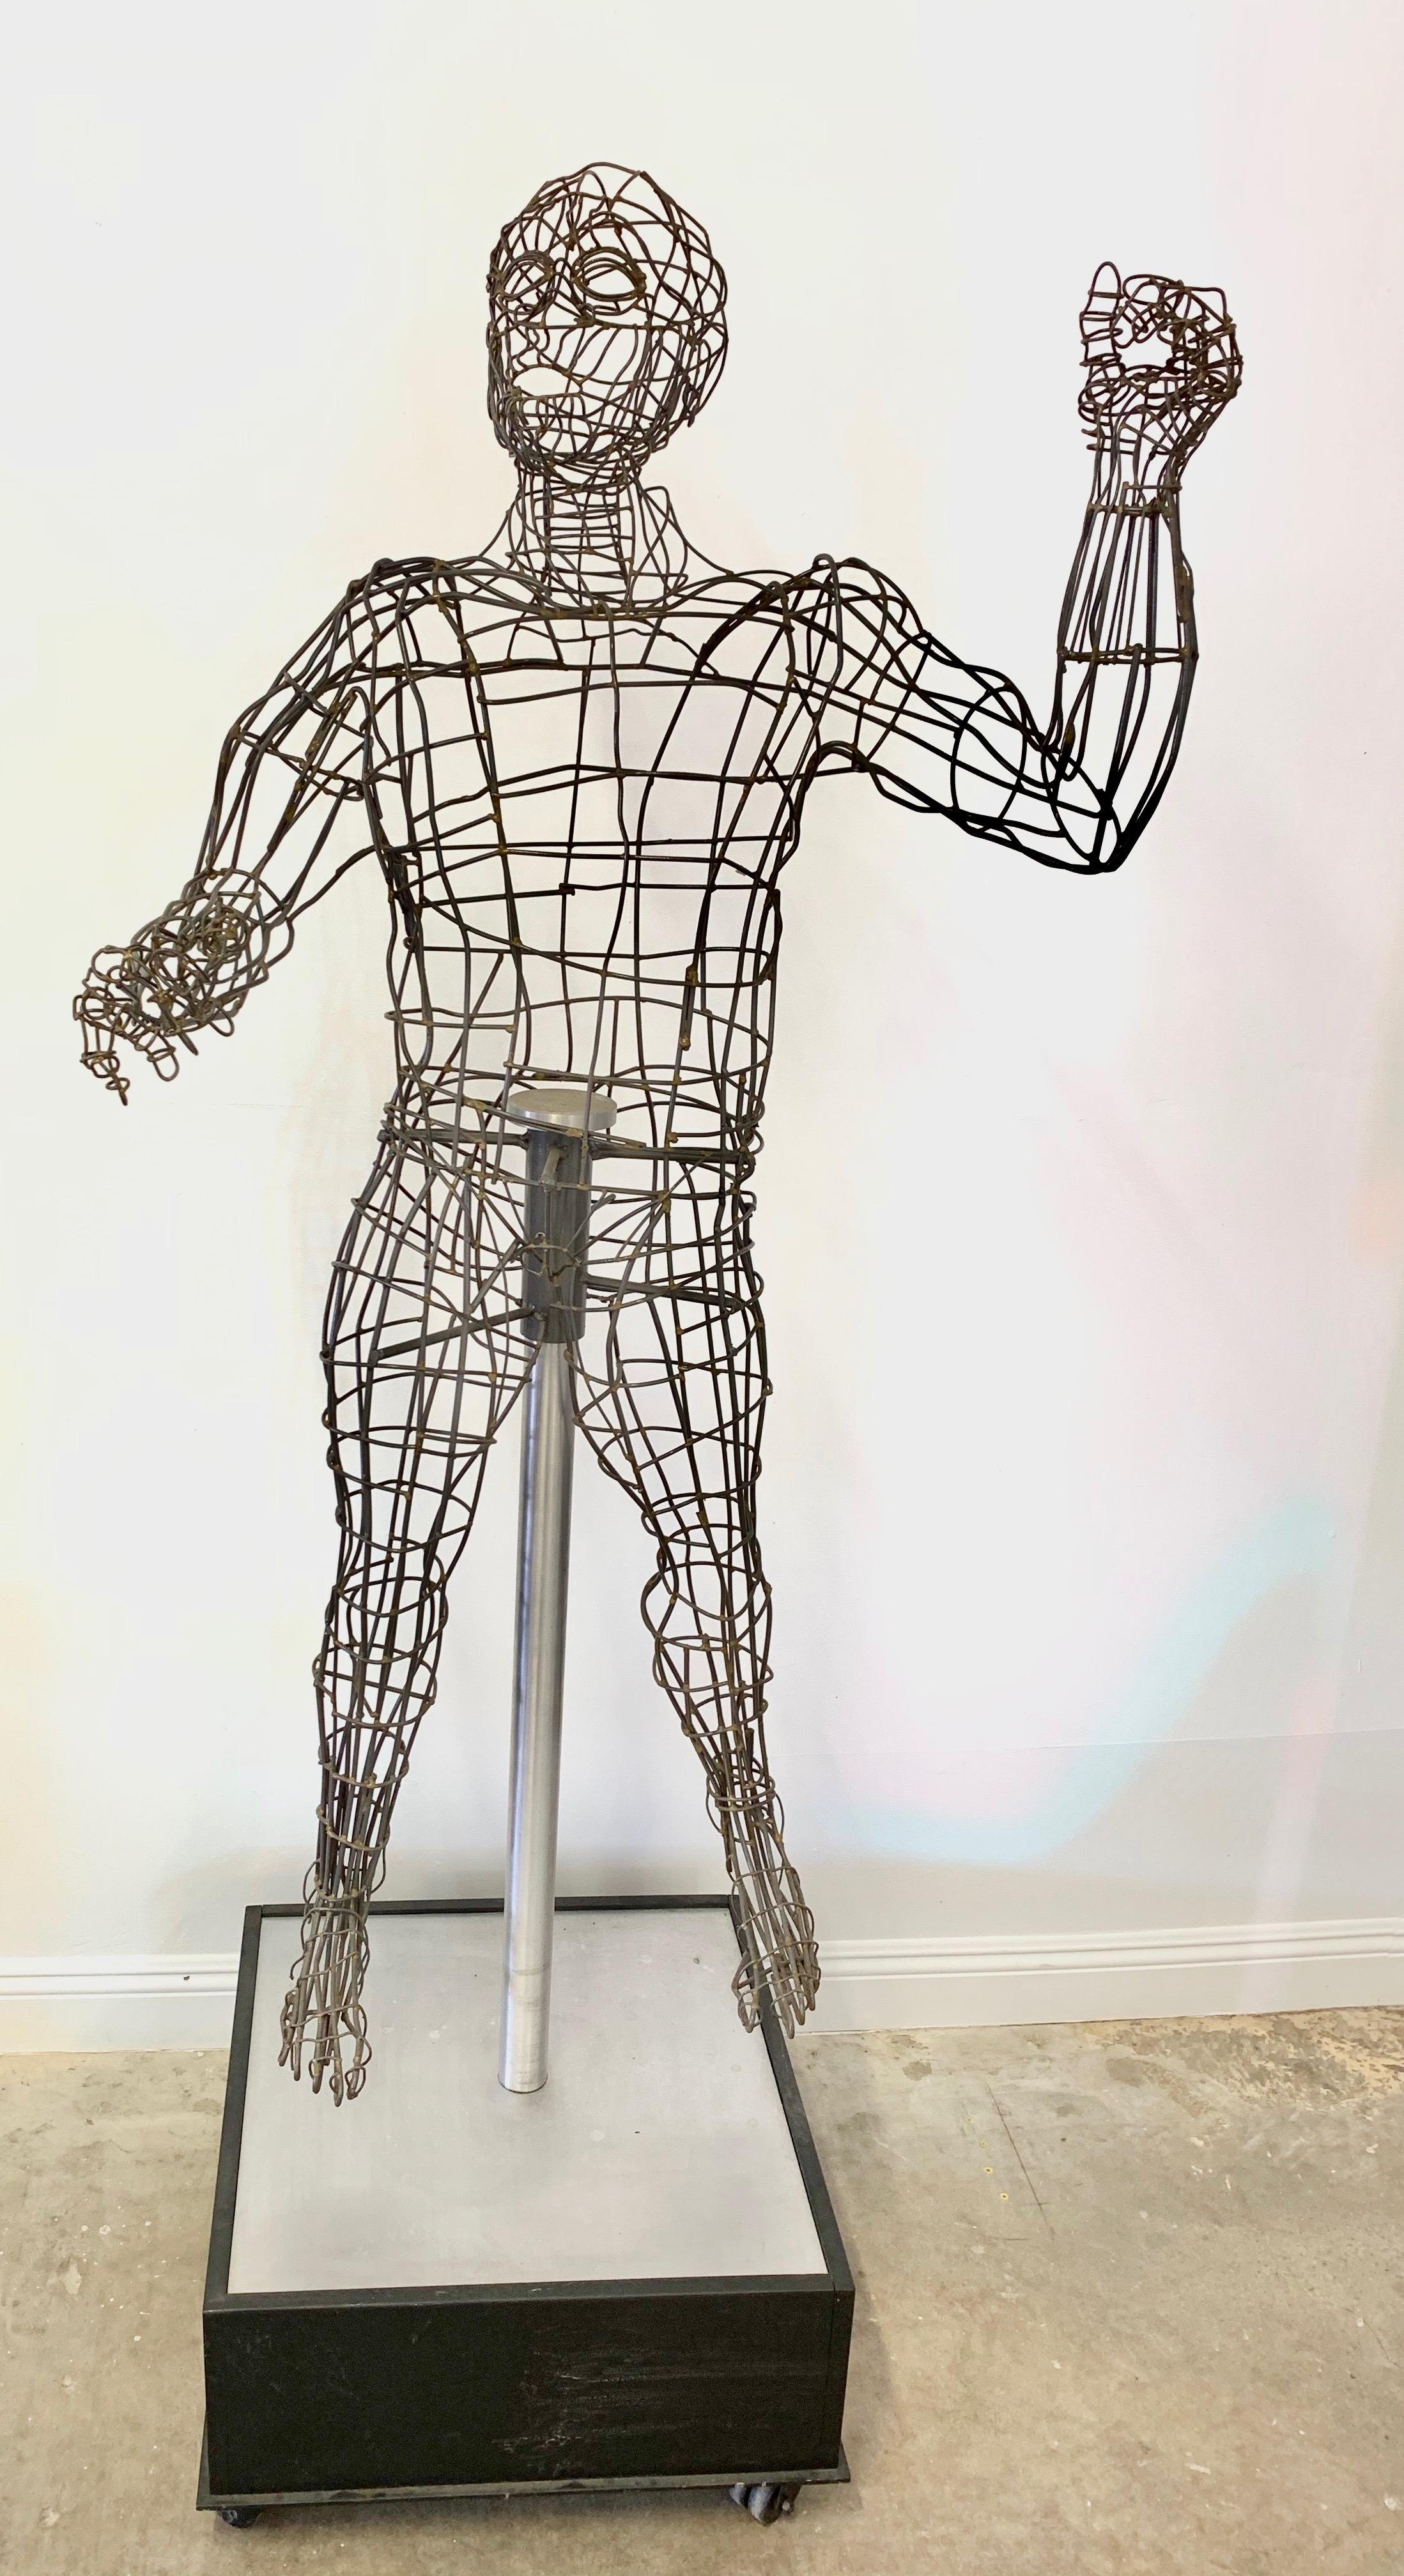 Massive wire sculpture of a man by Bruce Gray. Life-sized sculpture floating on rolling cube base. Measures: Just over 7 feet tall. Fantastic detail and presence. Excellent condition.